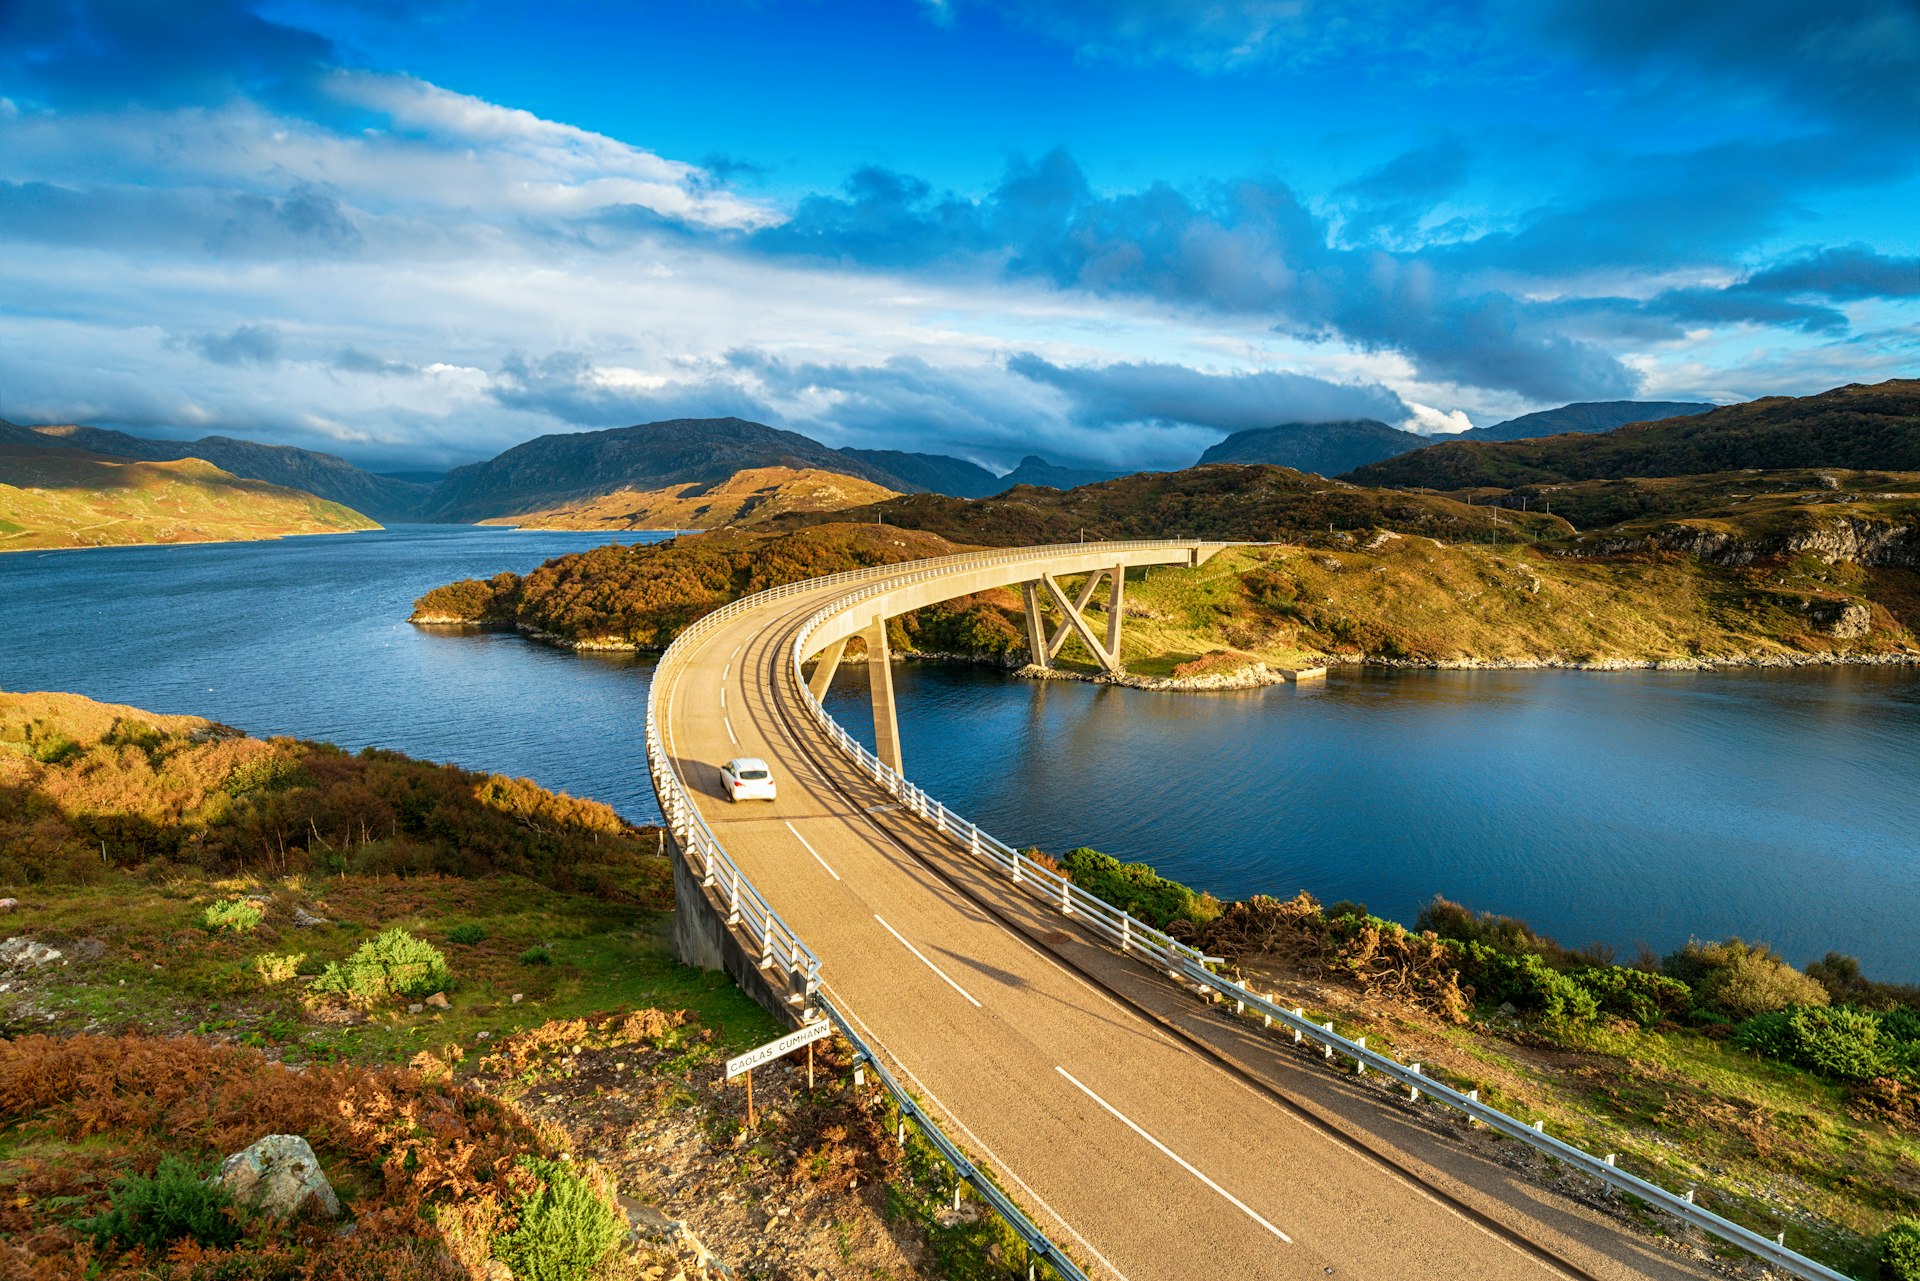 The Kylesku Bridge spanning Loch a' Chàirn Bhàin in the Scottish Highlands, which is a landmark on the North Coast 500 tourist driving route